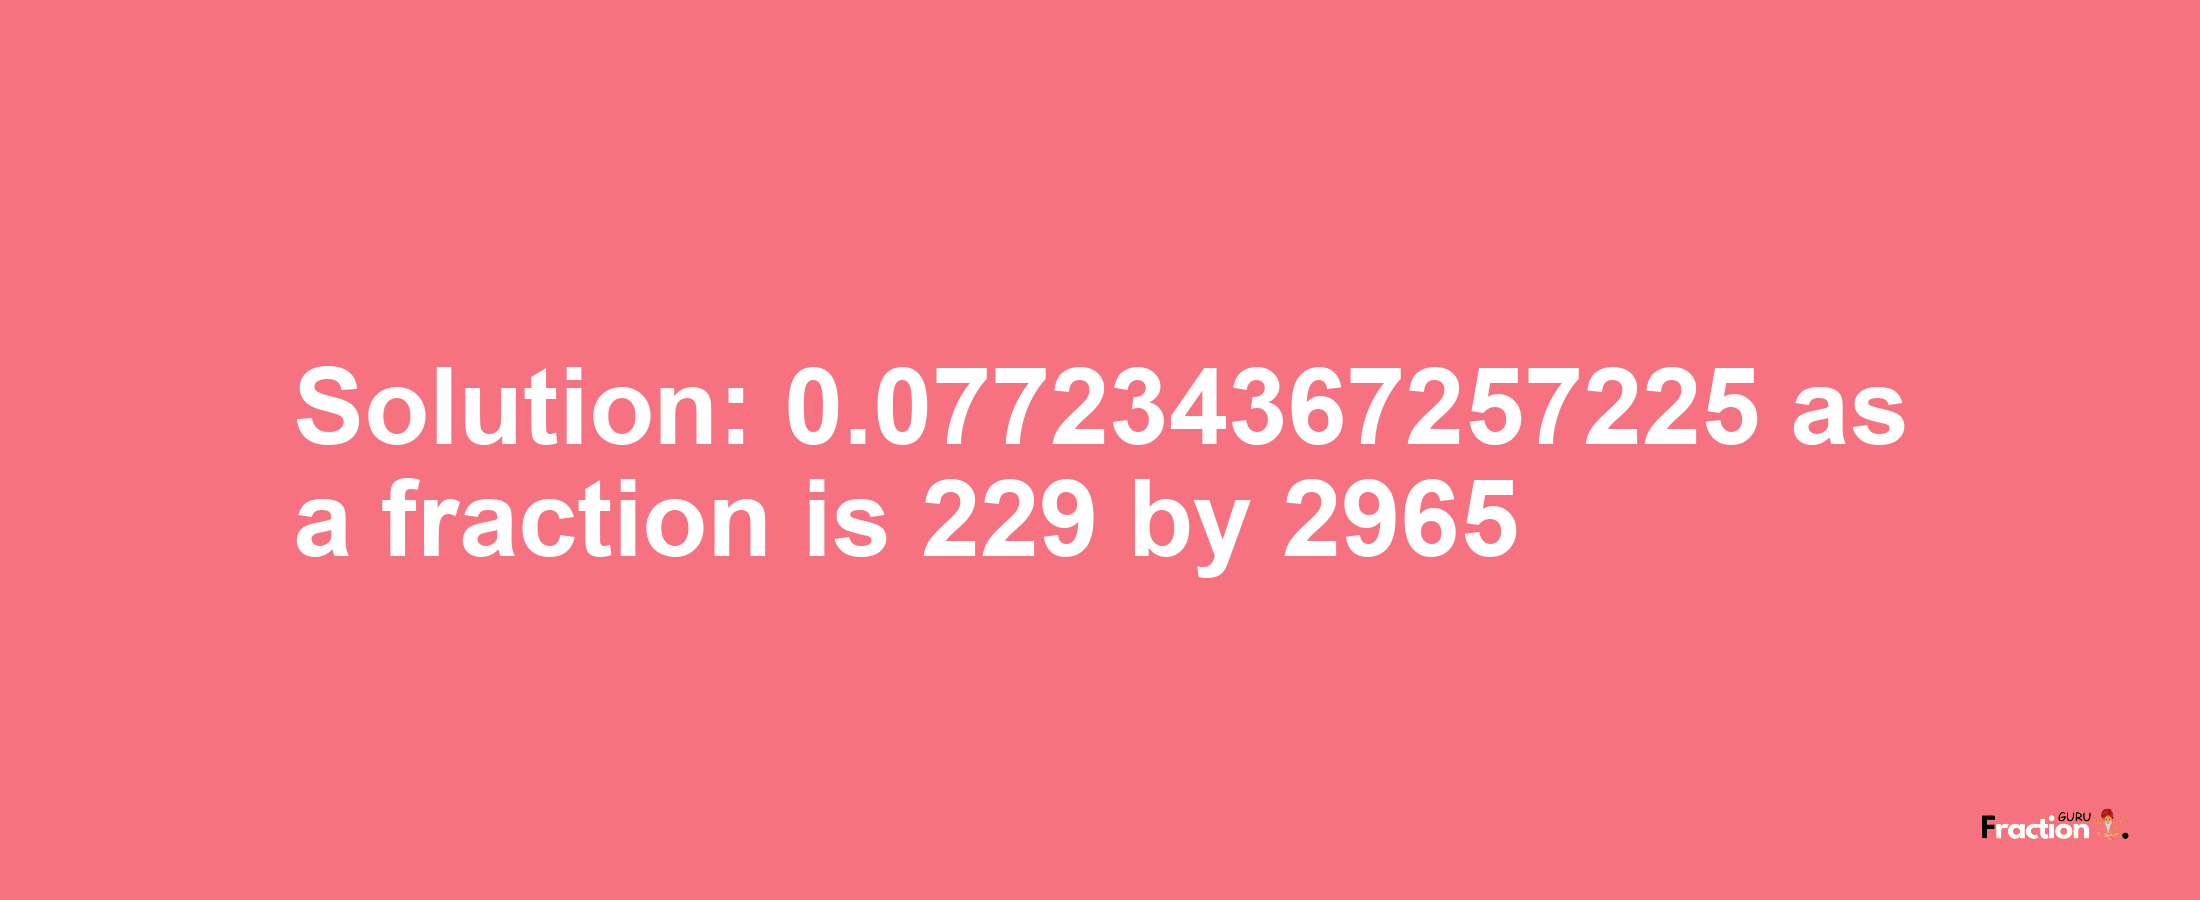 Solution:0.077234367257225 as a fraction is 229/2965